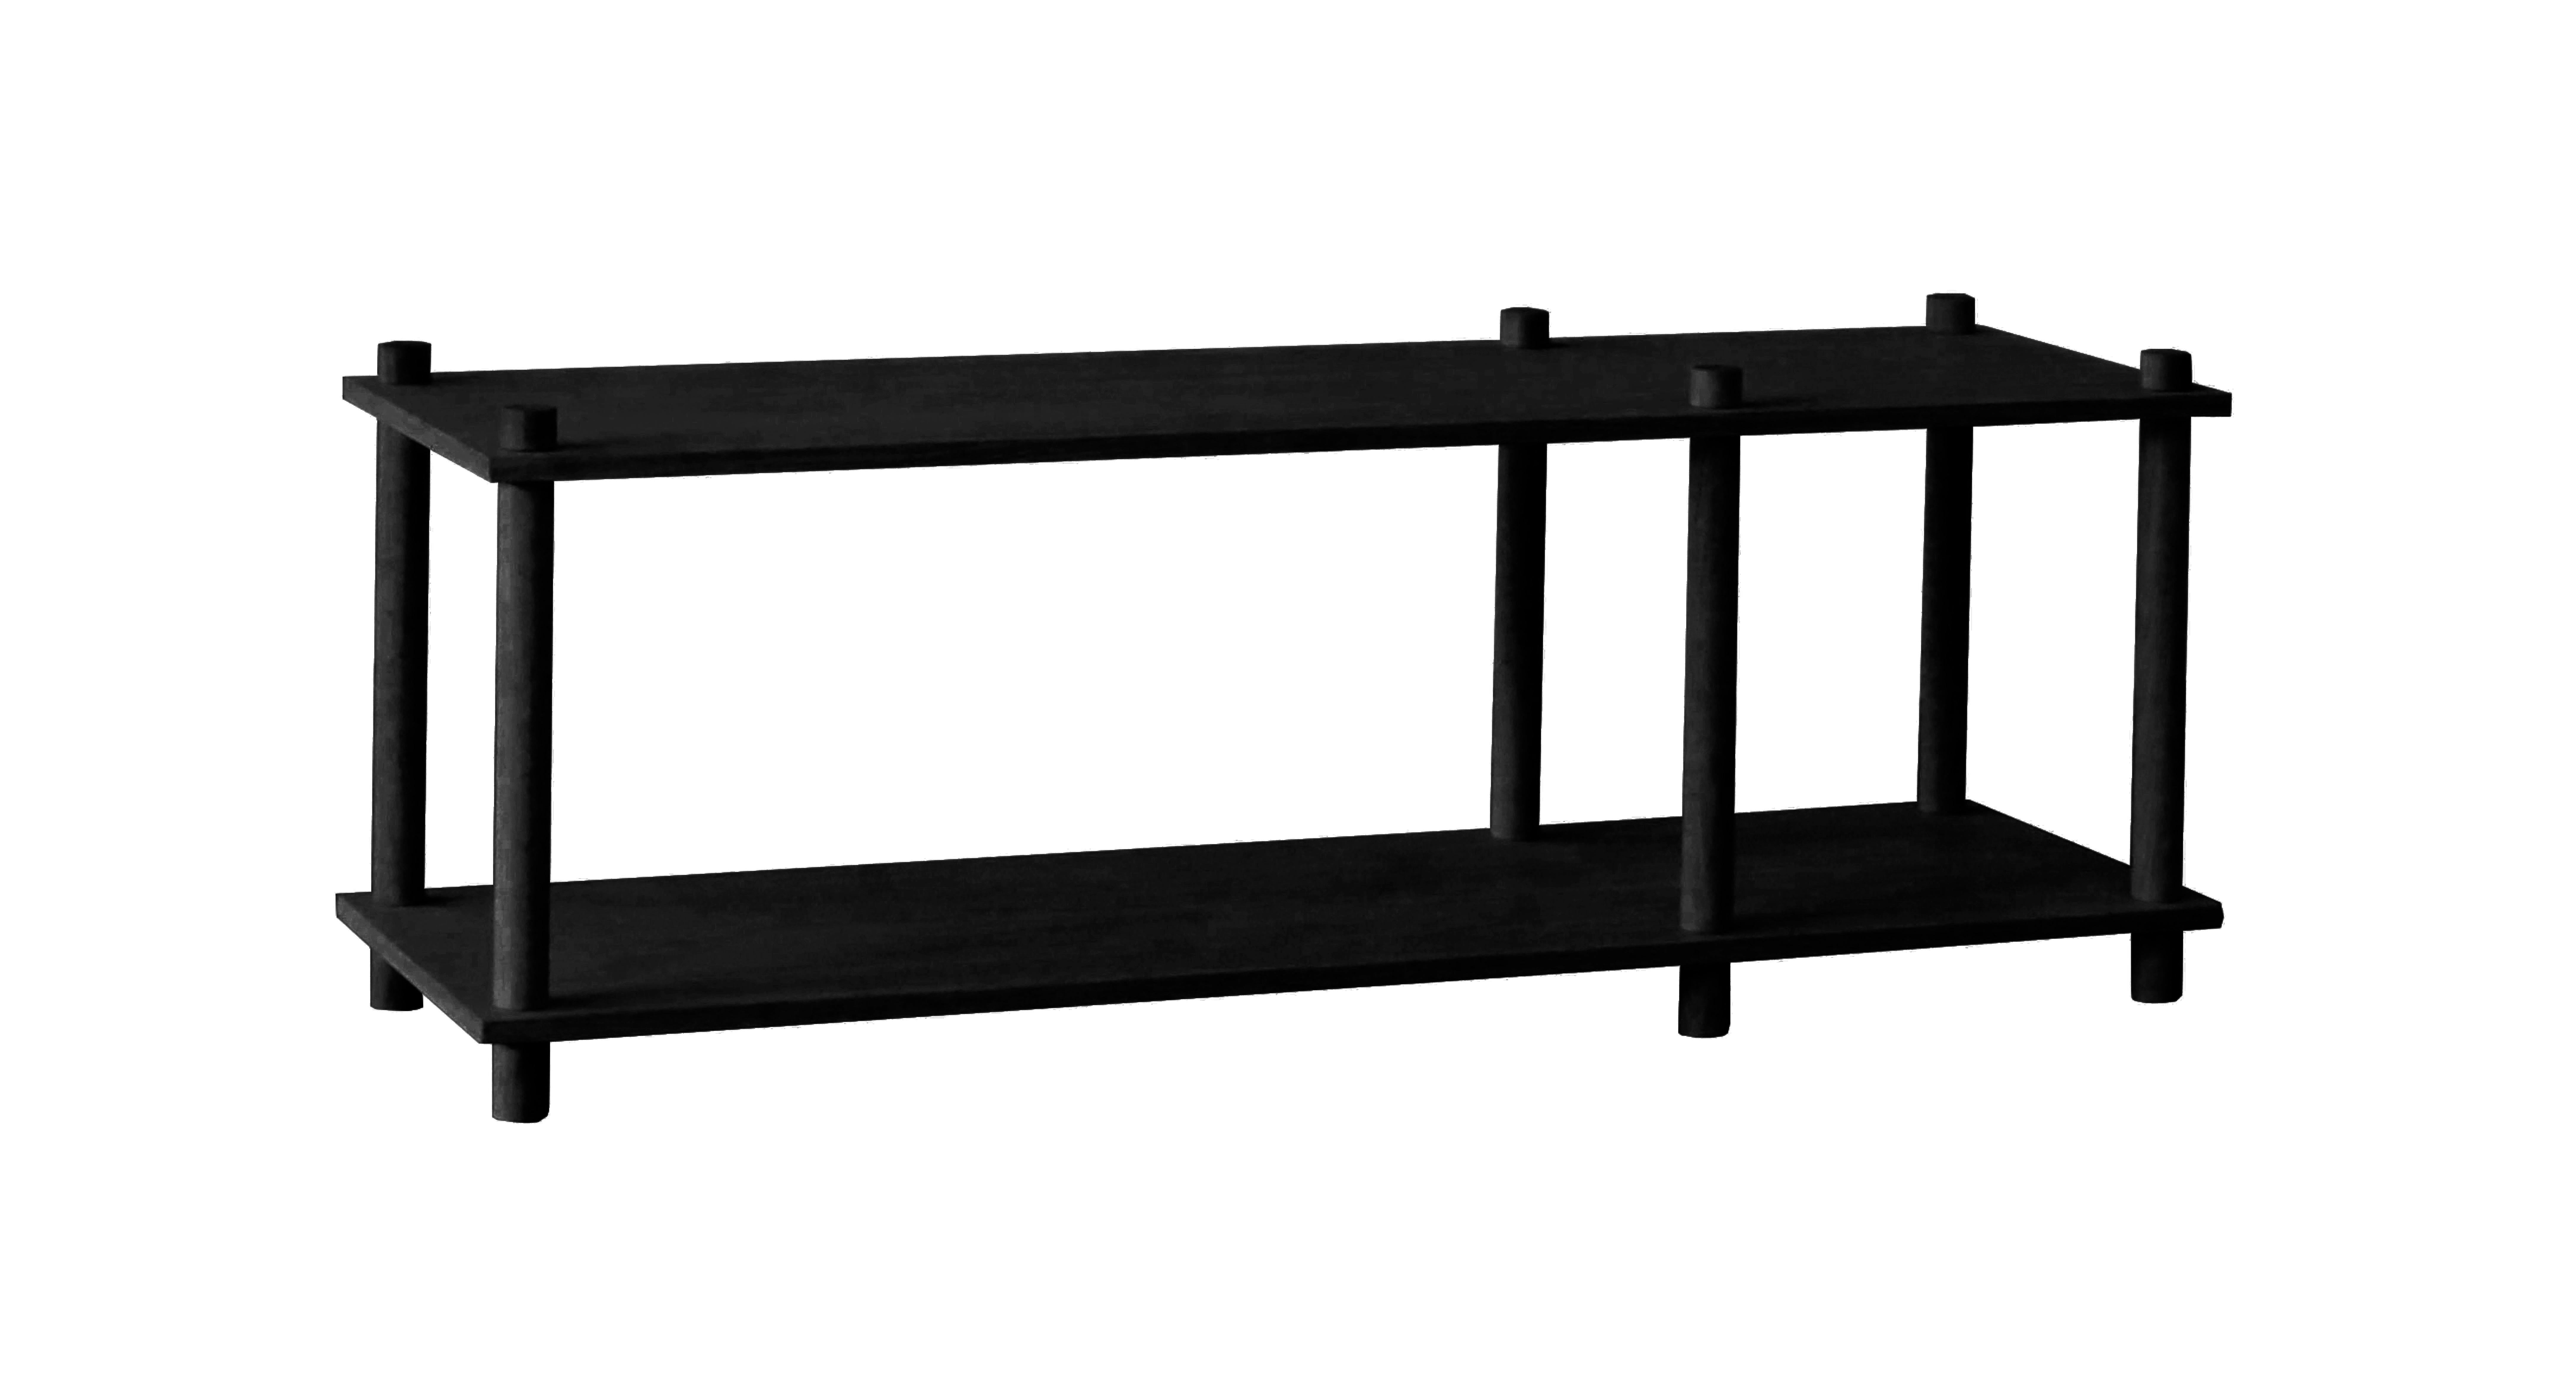 Black oak elevate shelving I by Camilla Akersveen and Christopher Konings
Materials: Metal, oak.
Dimensions: D 40 x W 120 x H 44.3 cm
Available in matt lacquered oak or black oak. Different shelving sistems available.

Camilla Akersveen and